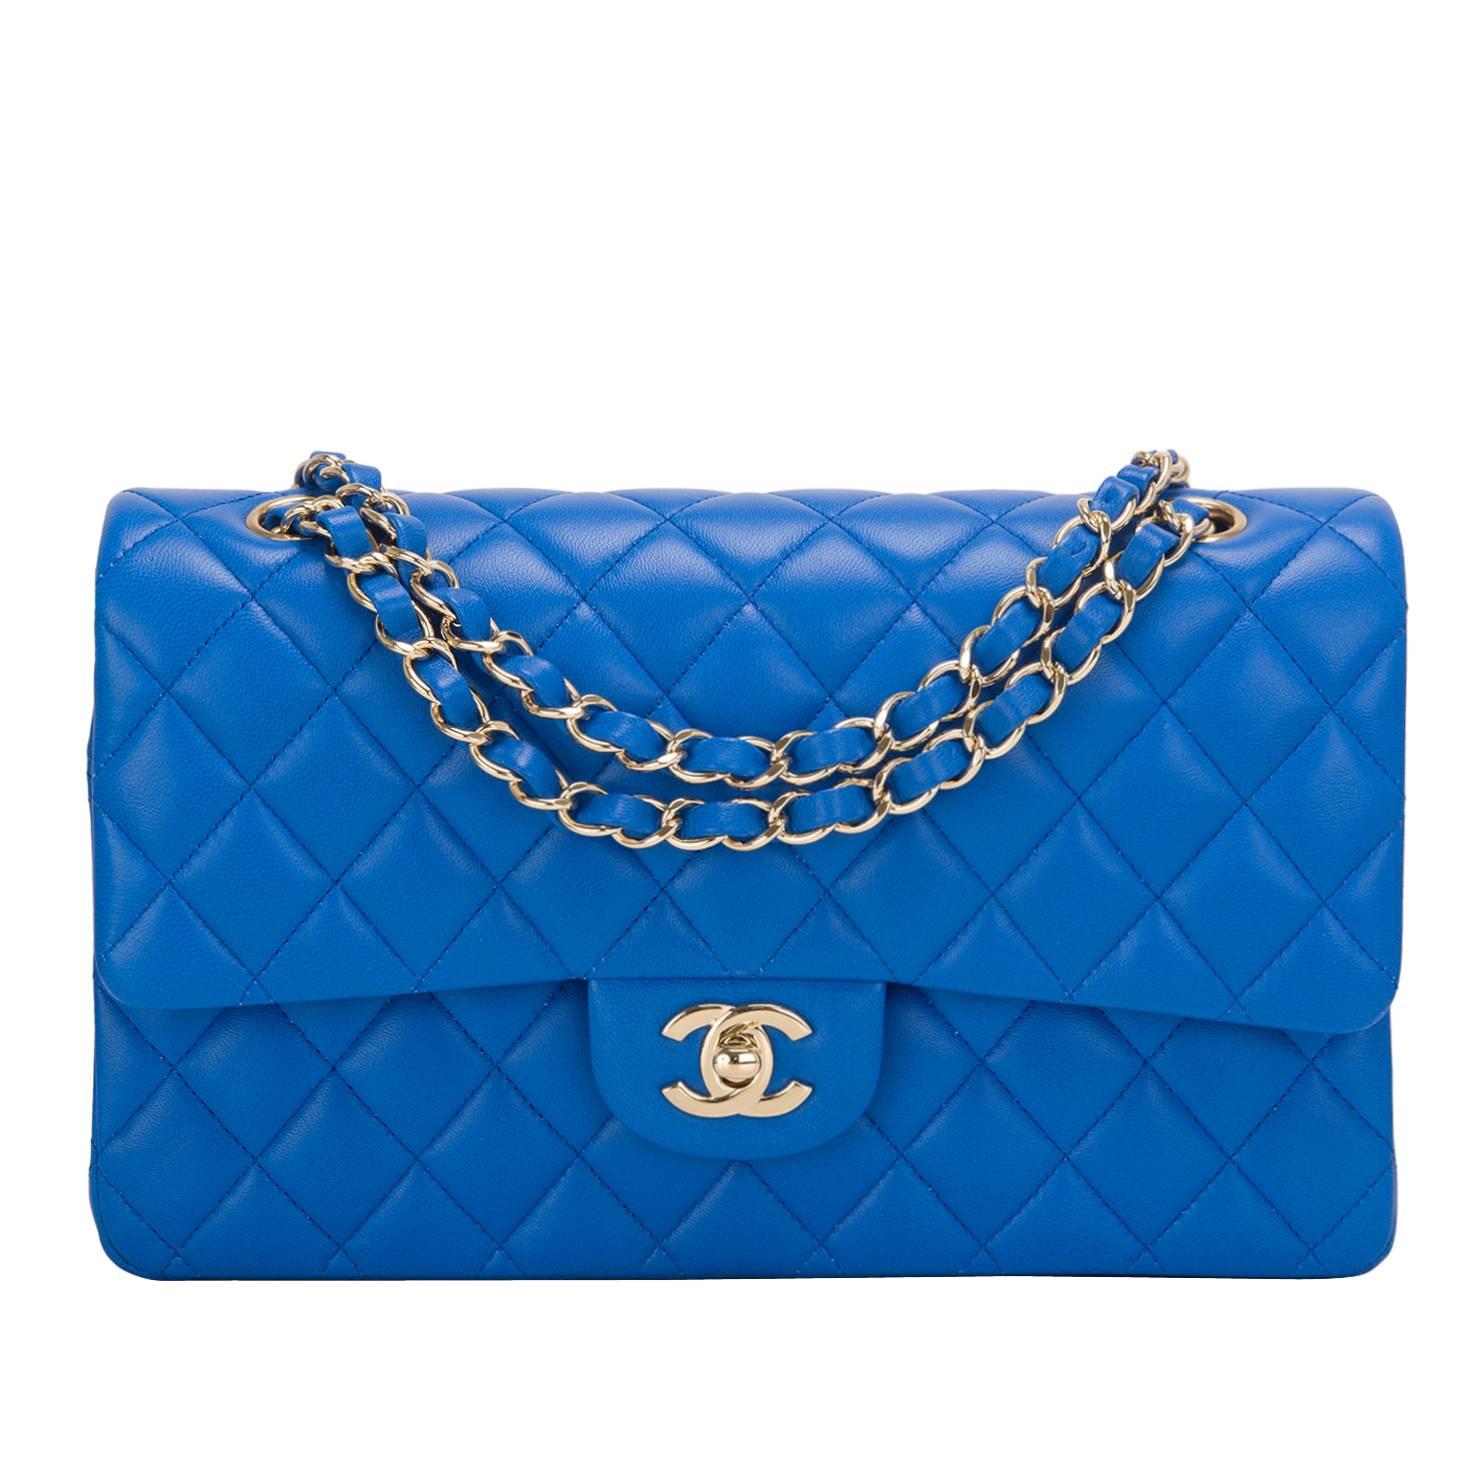 Chanel Blue Quilted Lambskin Medium Double Flap Bag For Sale